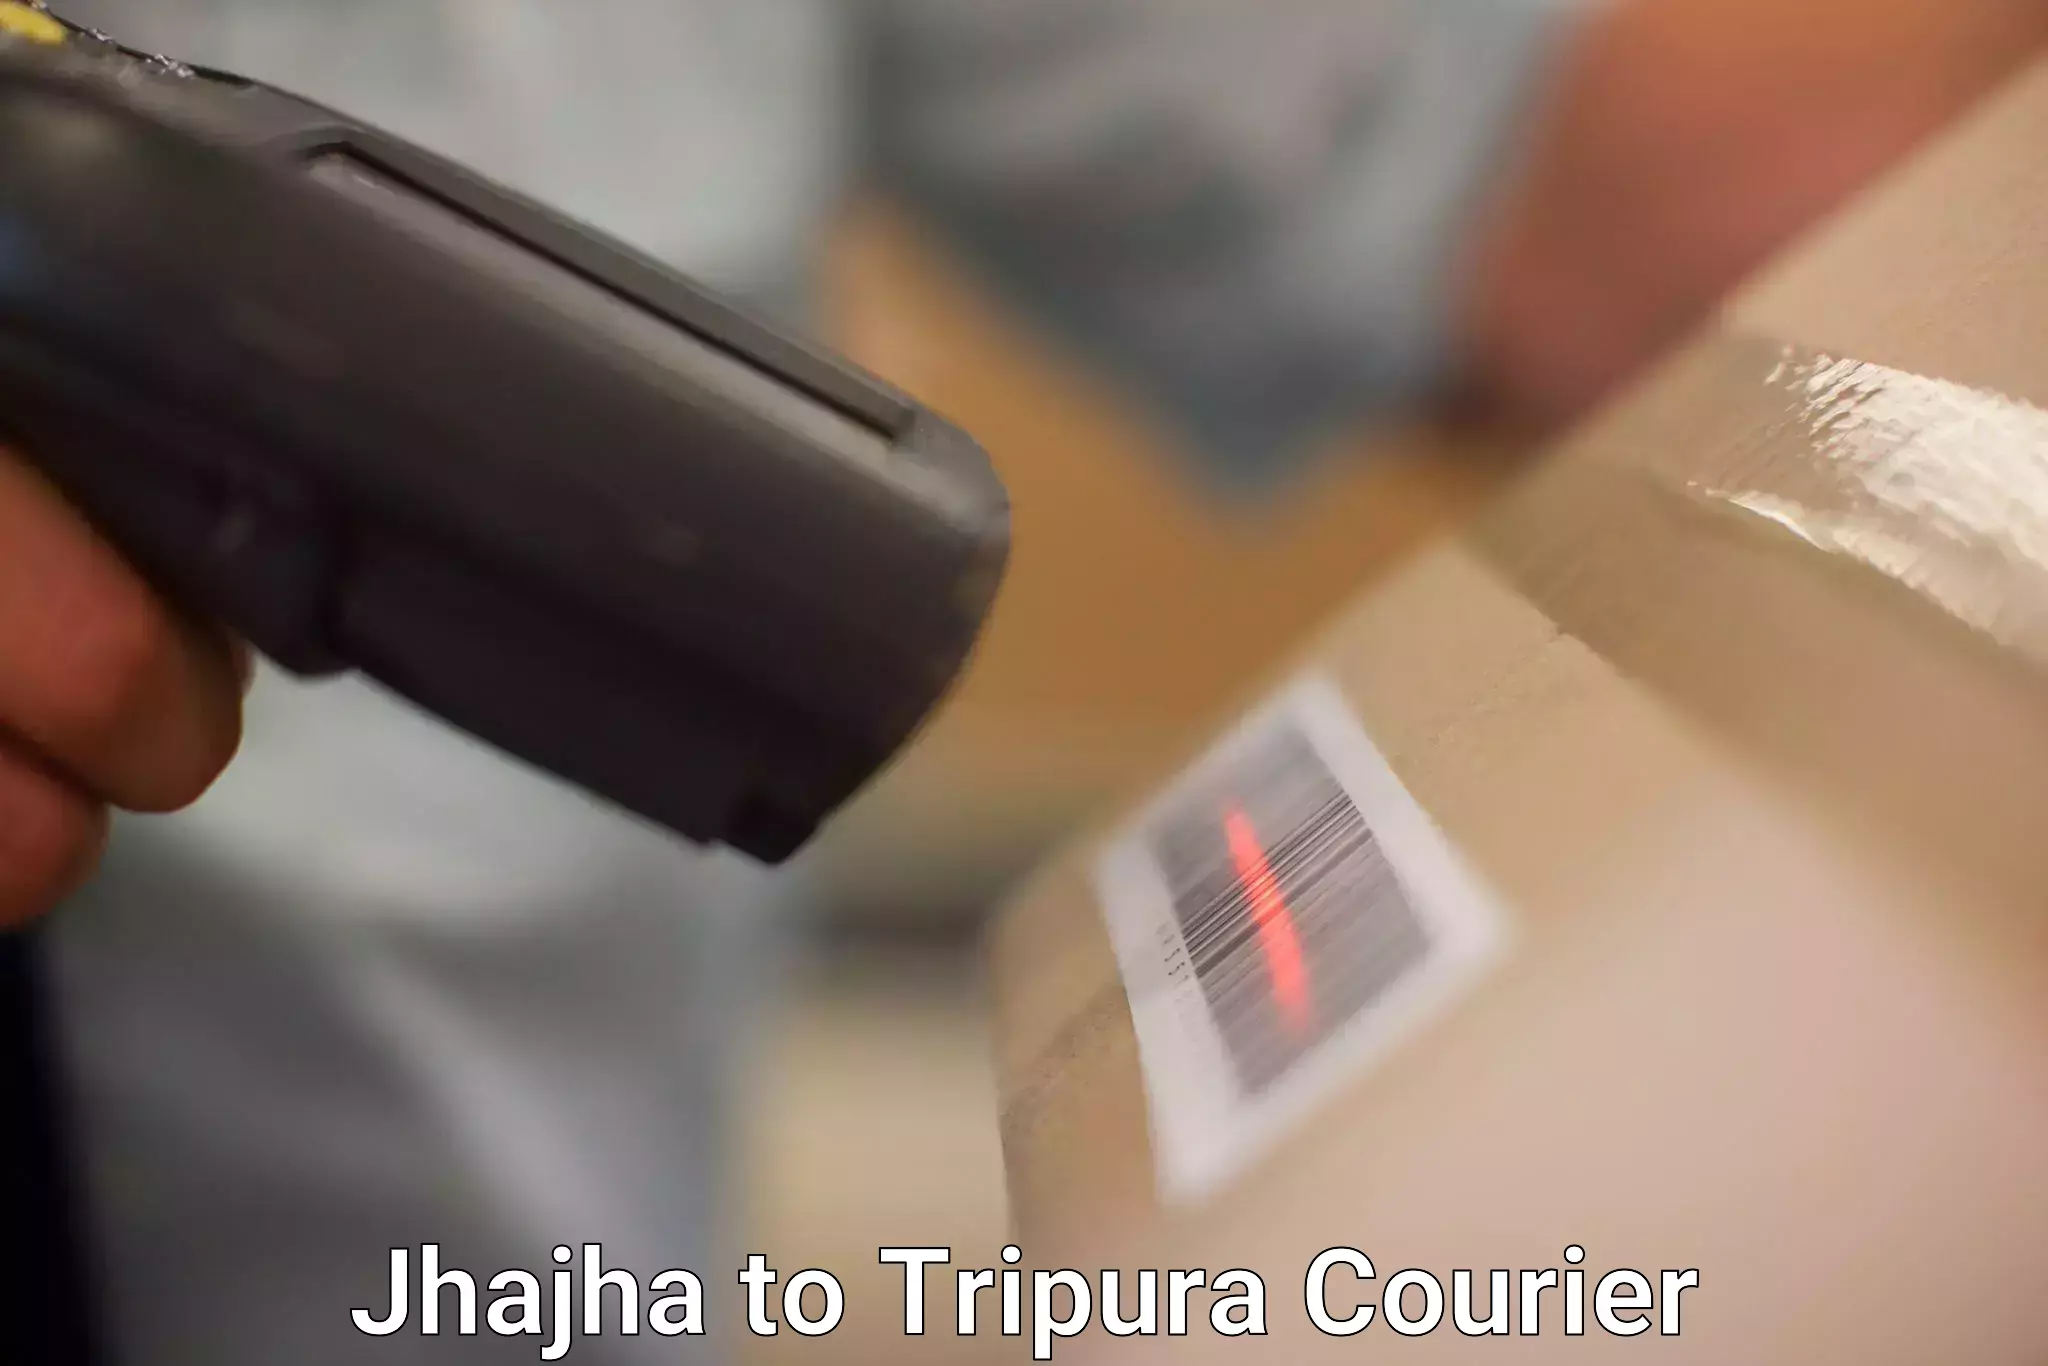 Reliable delivery network Jhajha to Udaipur Tripura